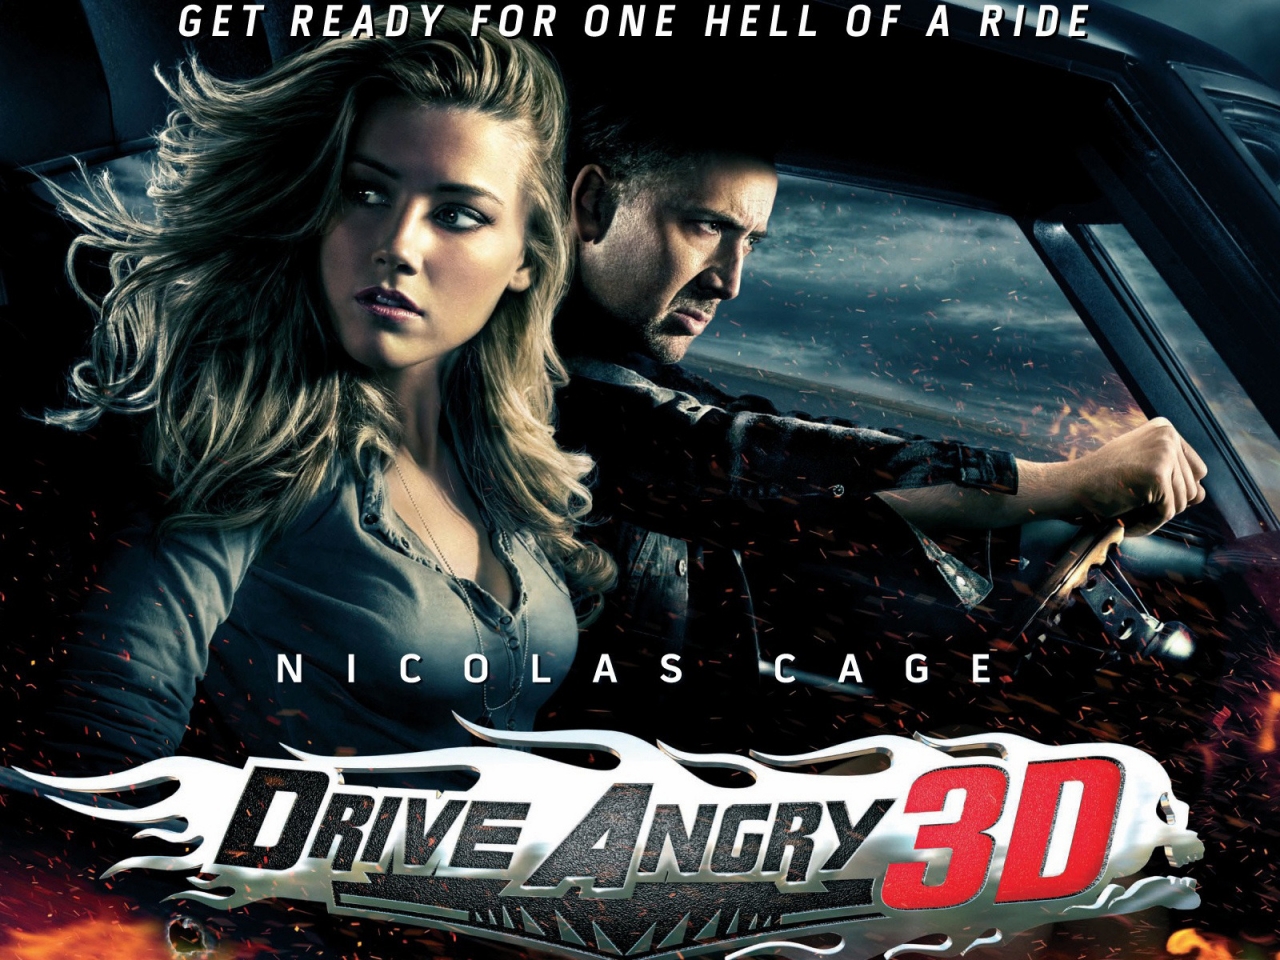 Drive Angry 3D for 1280 x 960 resolution